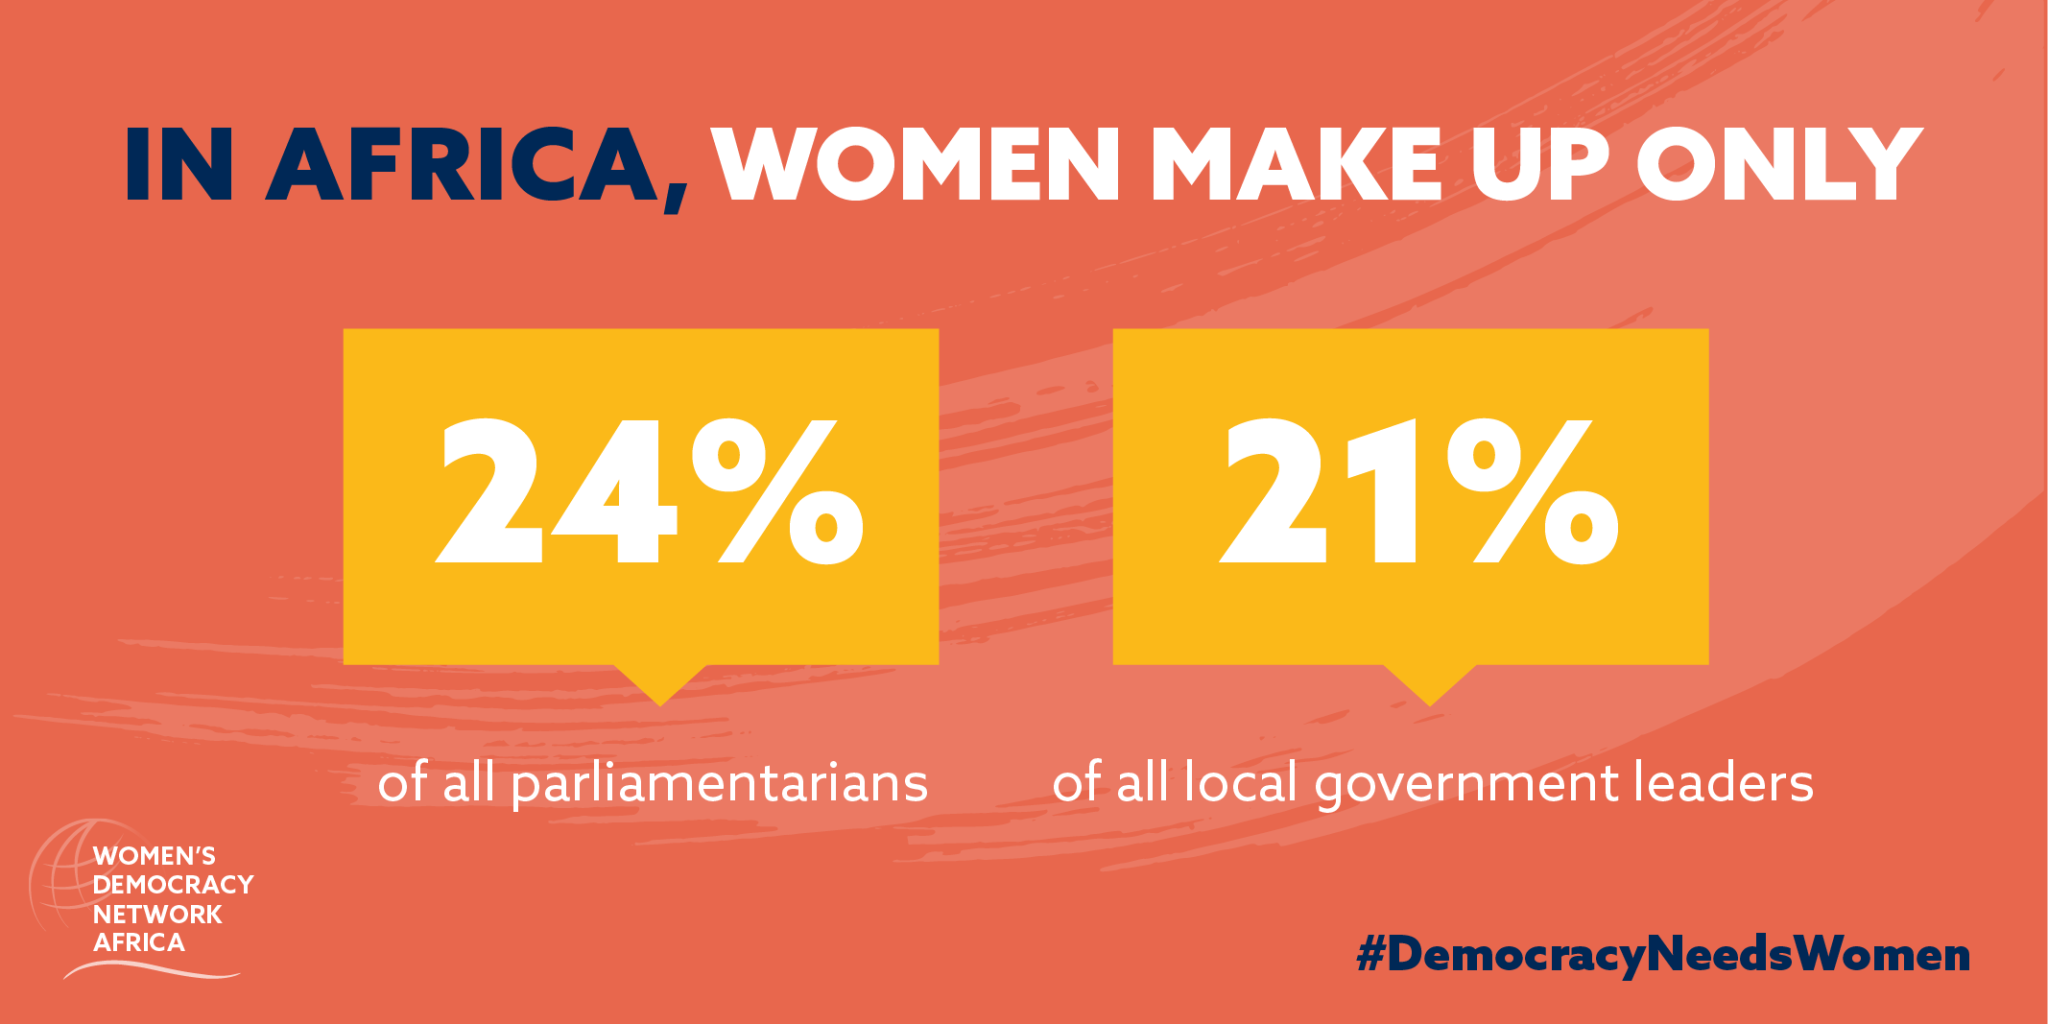 A graphic shows women make up 24% of parliamentarians and 21% of local government leaders in Africa